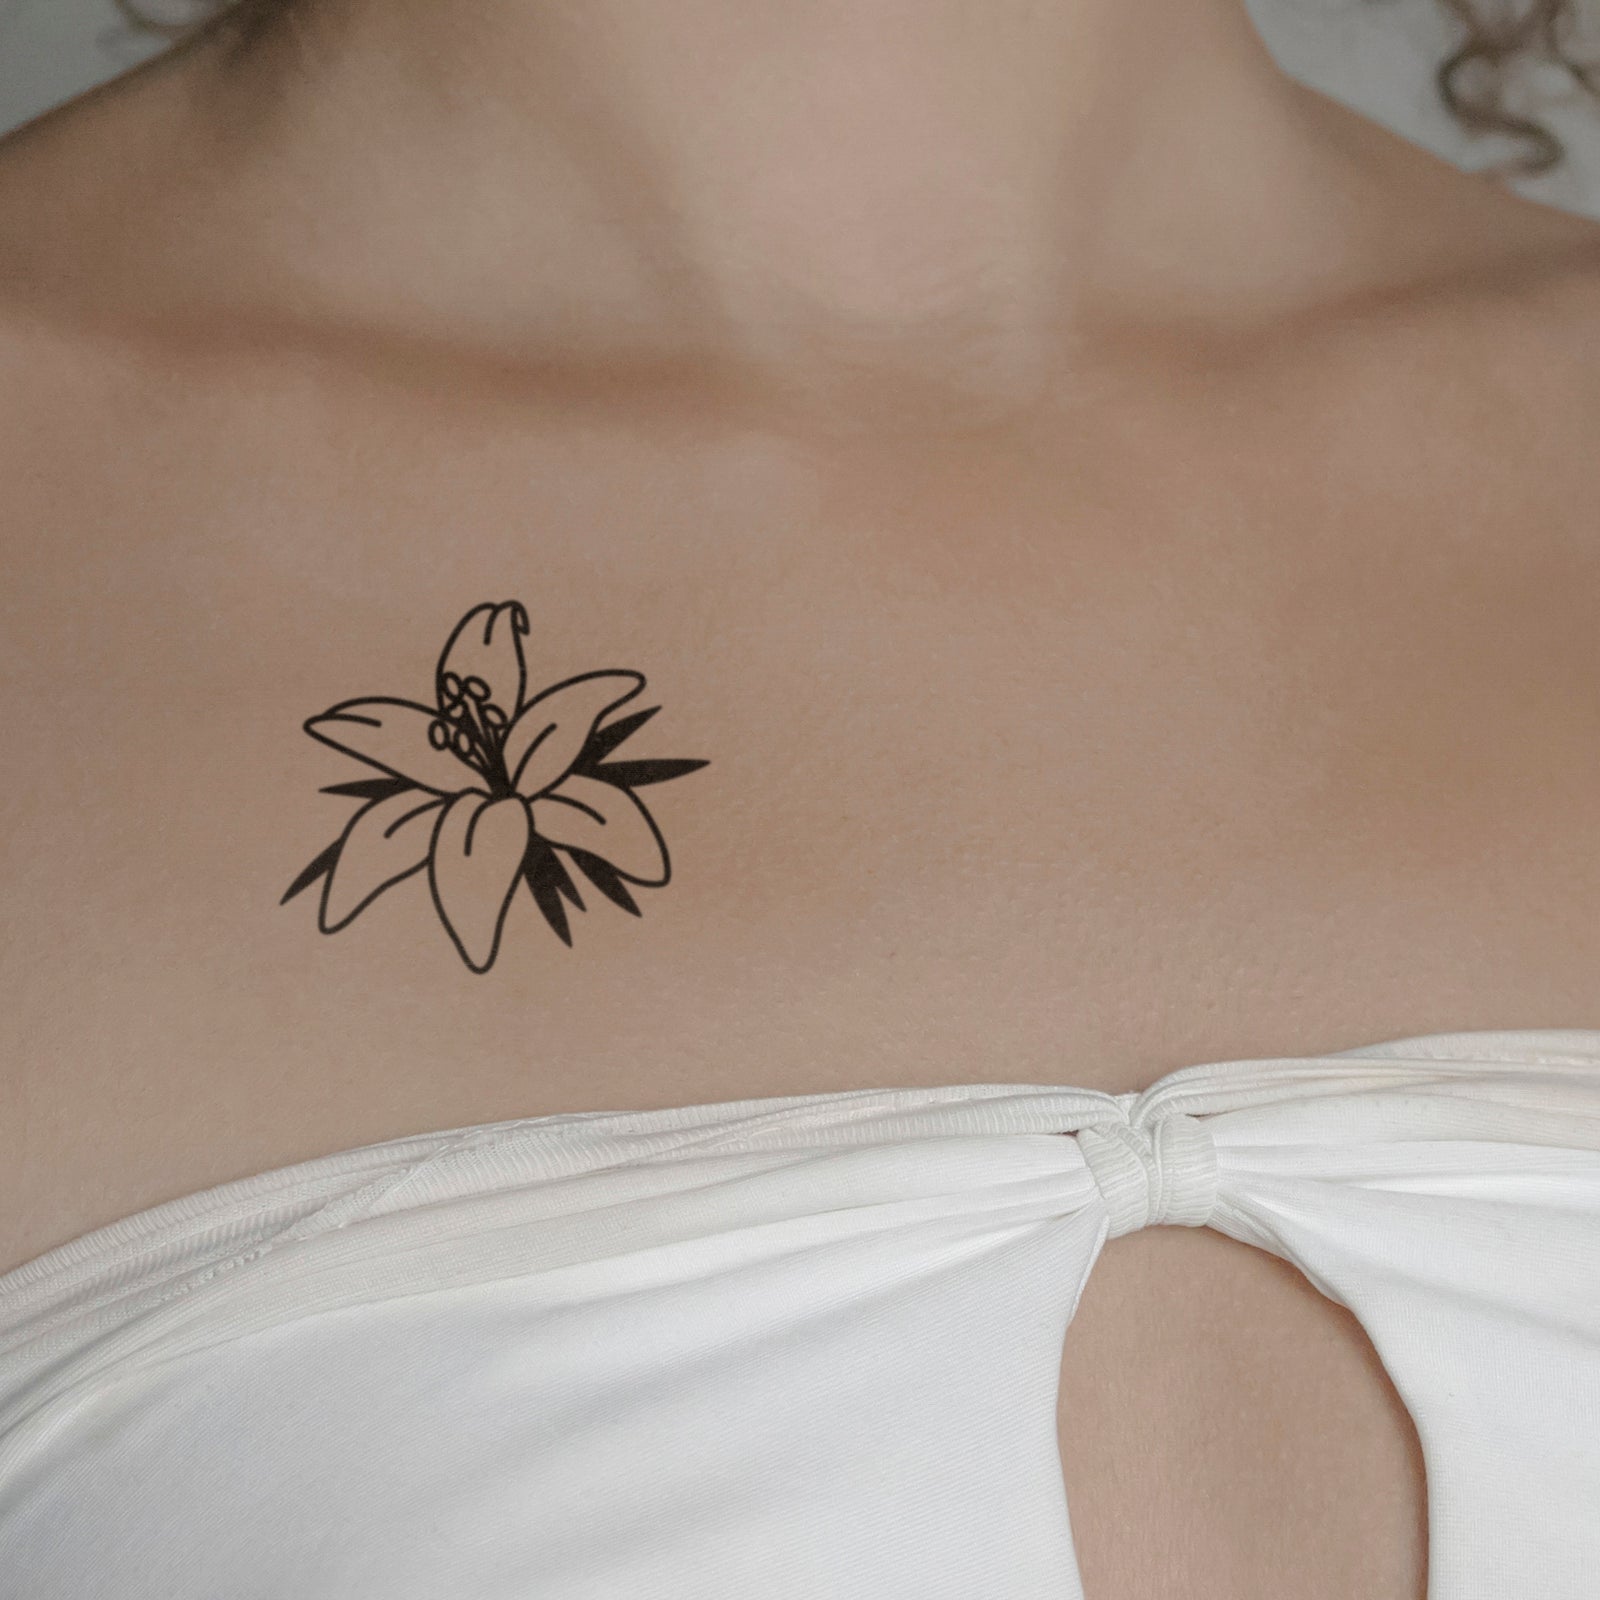 9 Awesome Flower Tattoos That Are Both Beautiful and Symbolic - KOYA SKIN